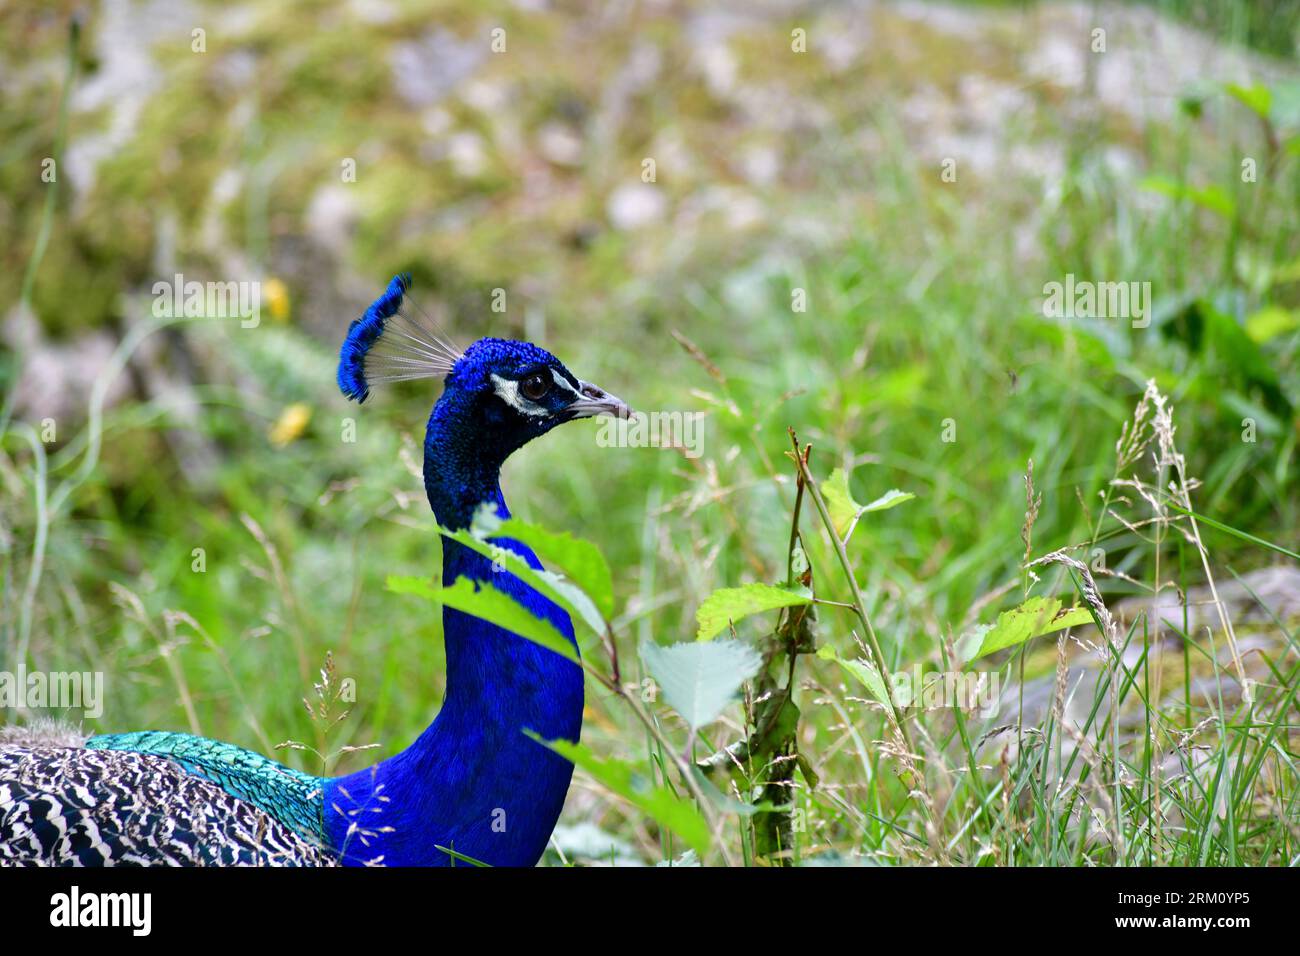 Closeup of peacock head seen from the side in natural surroundings. Copy space to the right of horizontal photo. Stock Photo